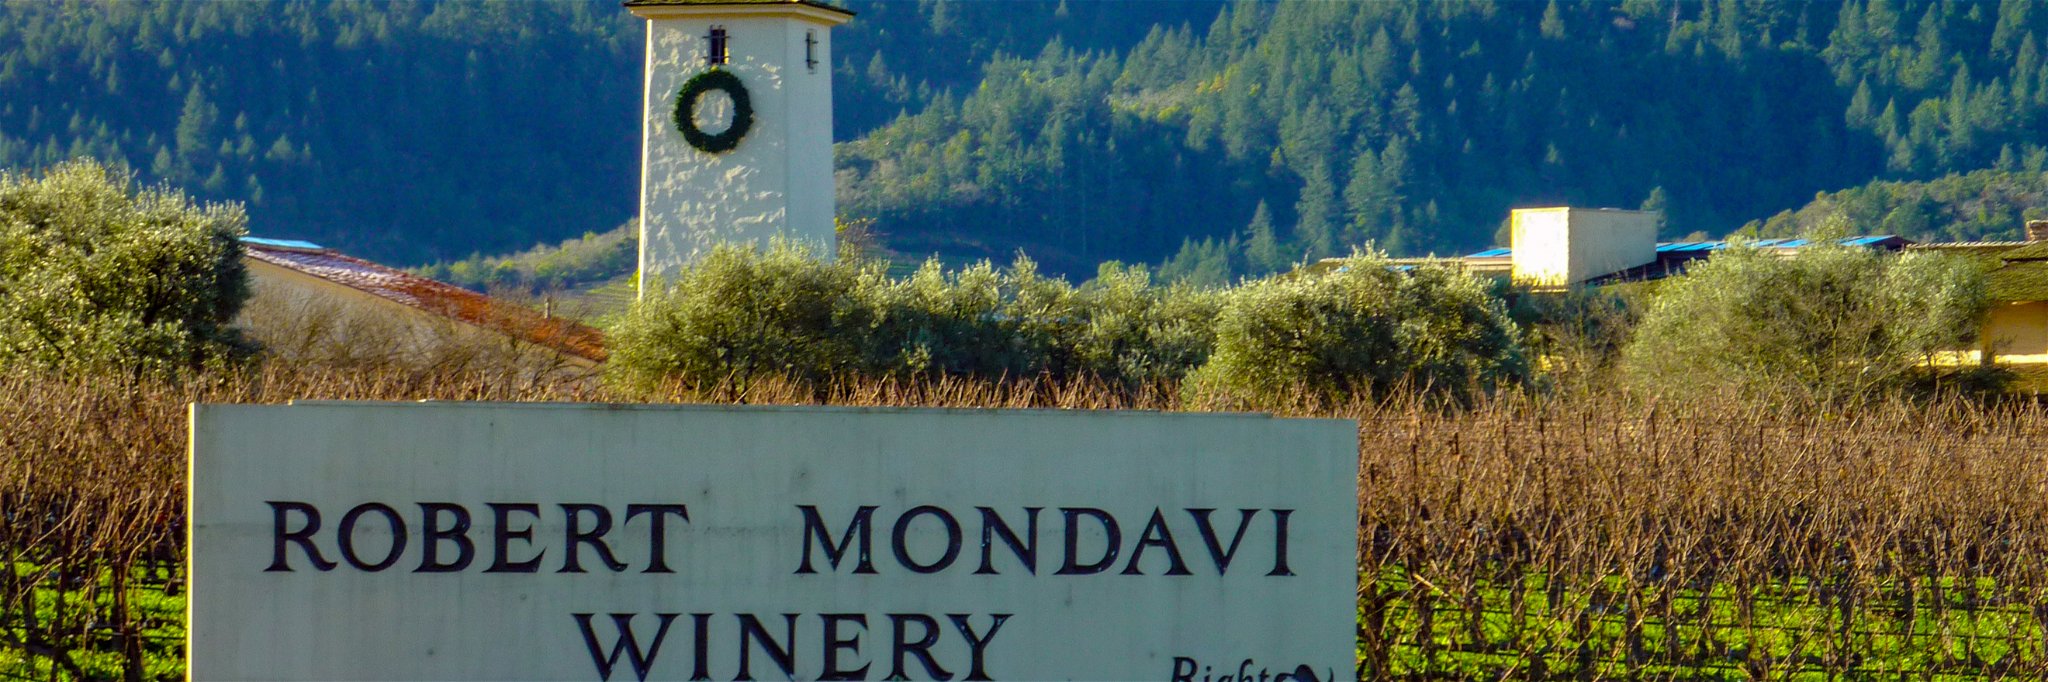 The auction includes large-format bottles from Robert Mondavi Winery.